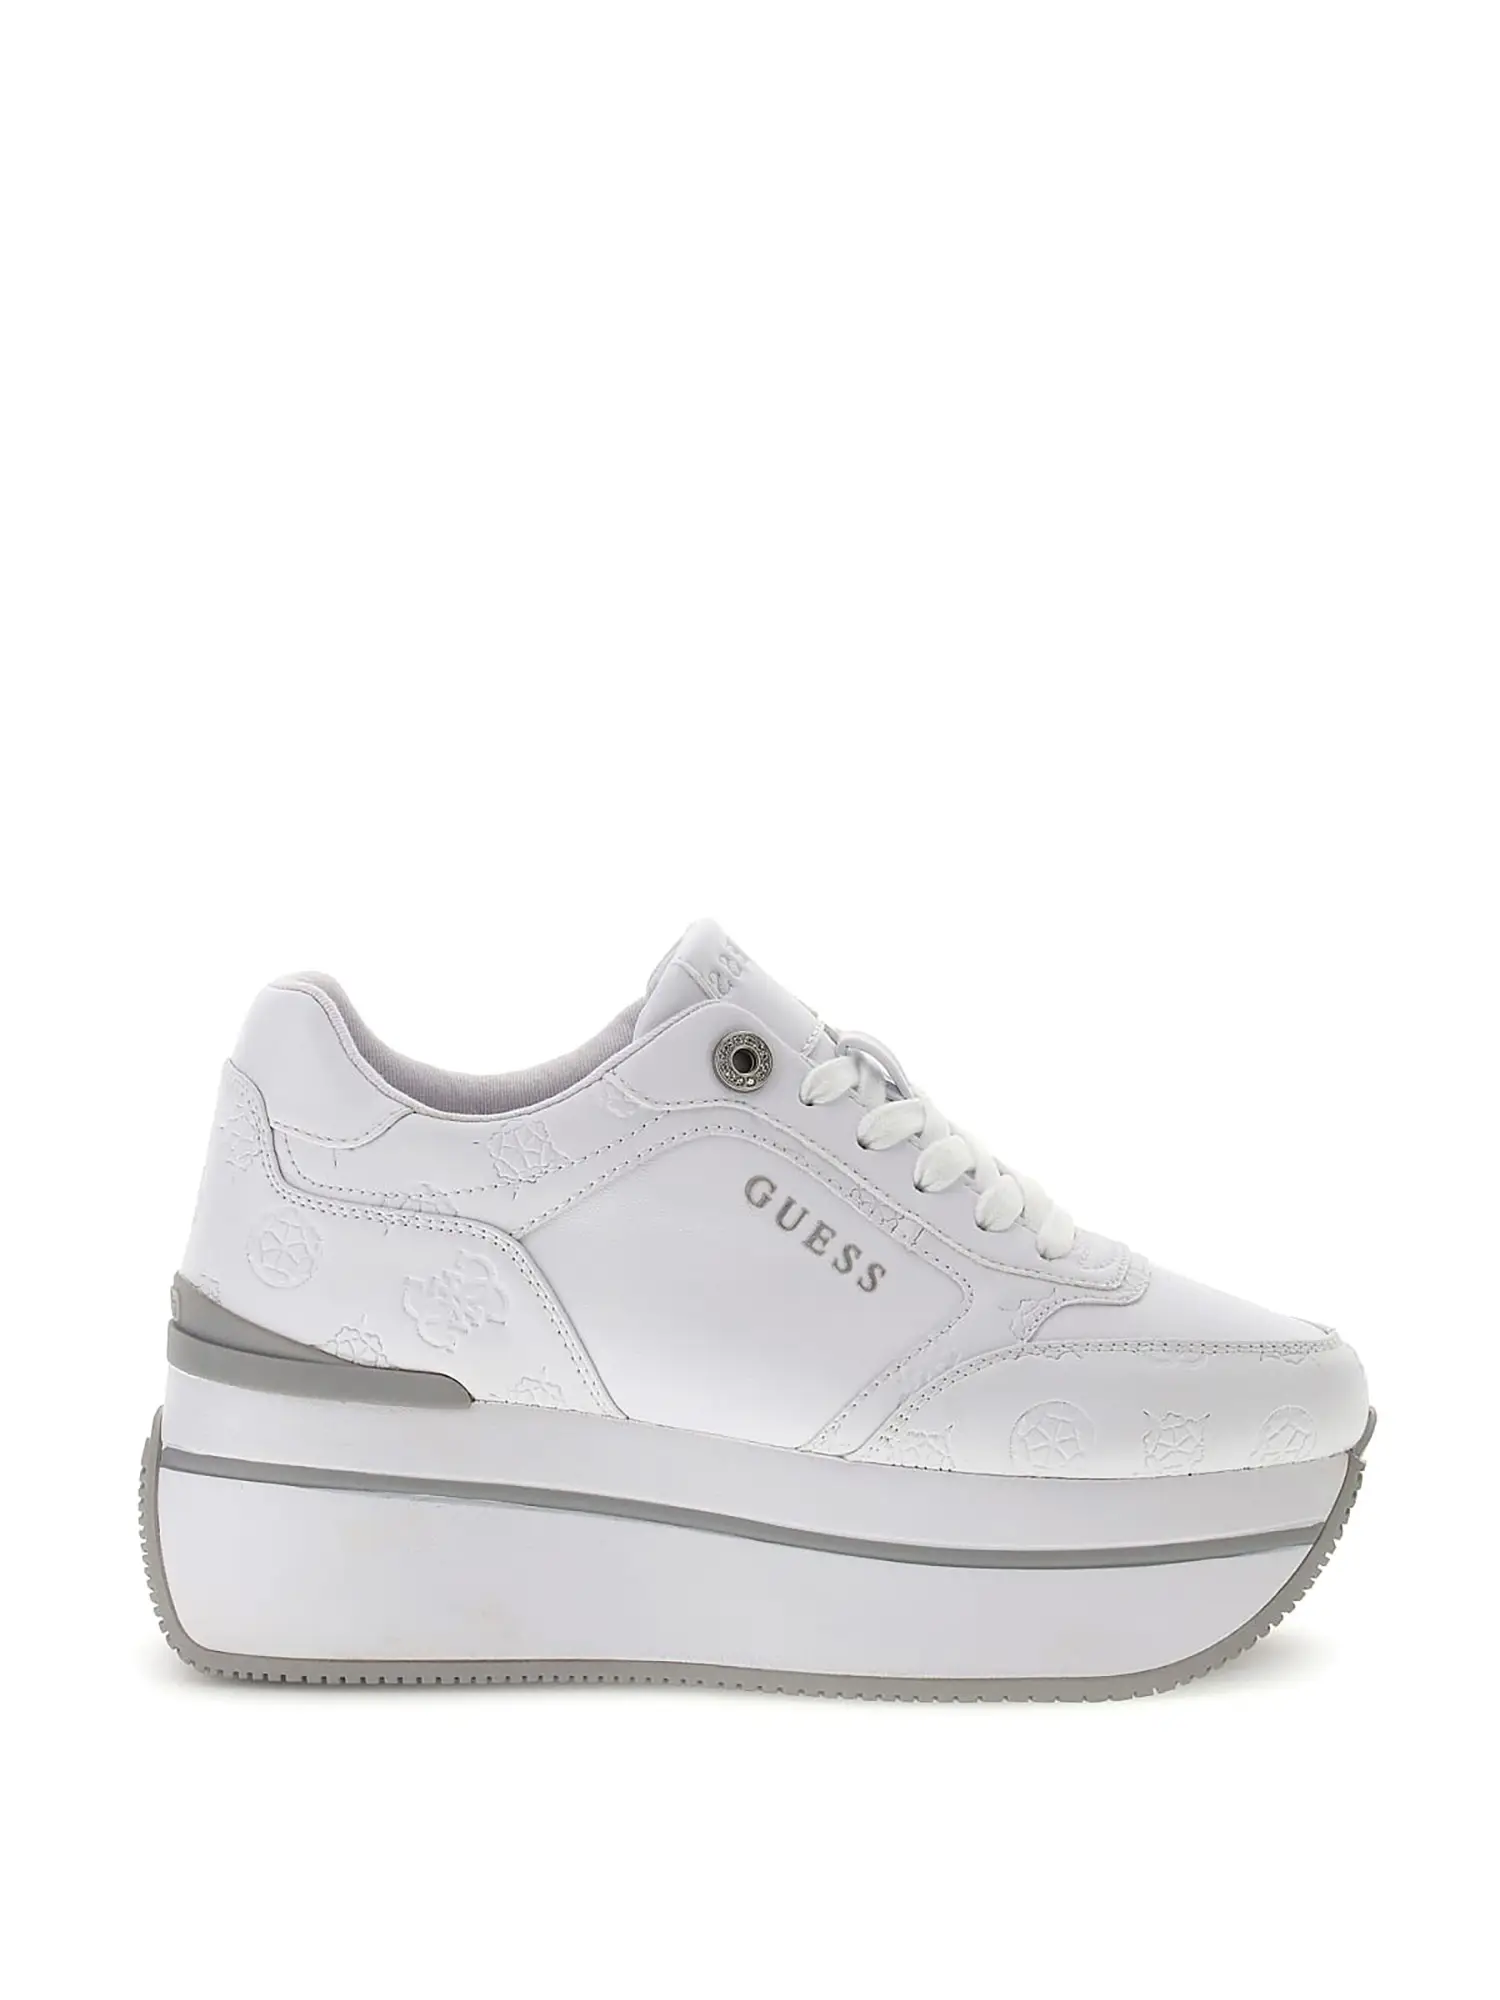 SNEAKERS DONNA - GUESS - FLPCAM FAL12 - BIANCO, 37